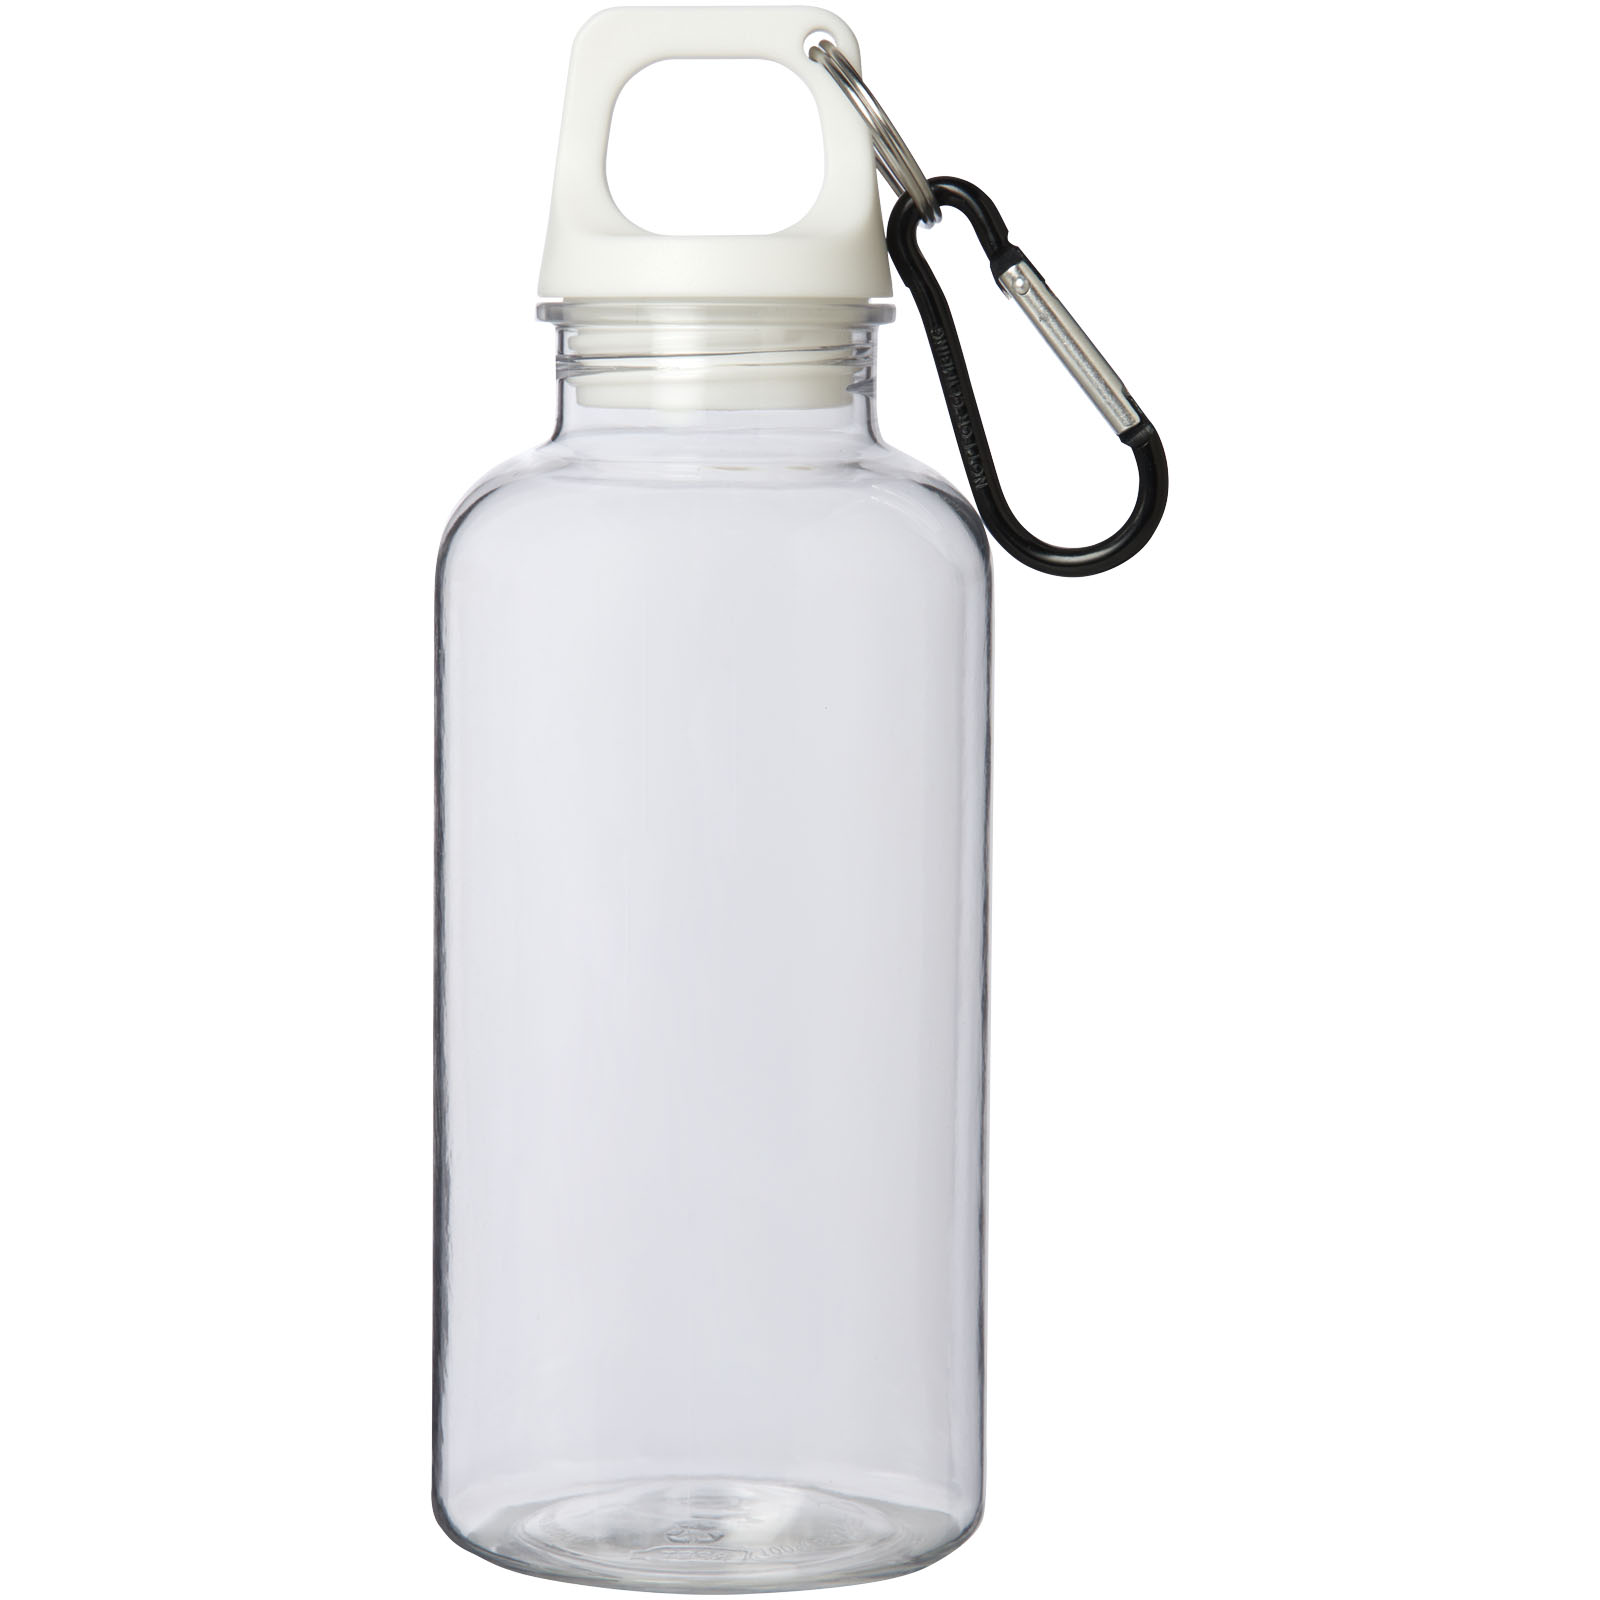 Advertising Water bottles - Oregon 400 ml RCS certified recycled plastic water bottle with carabiner - 1